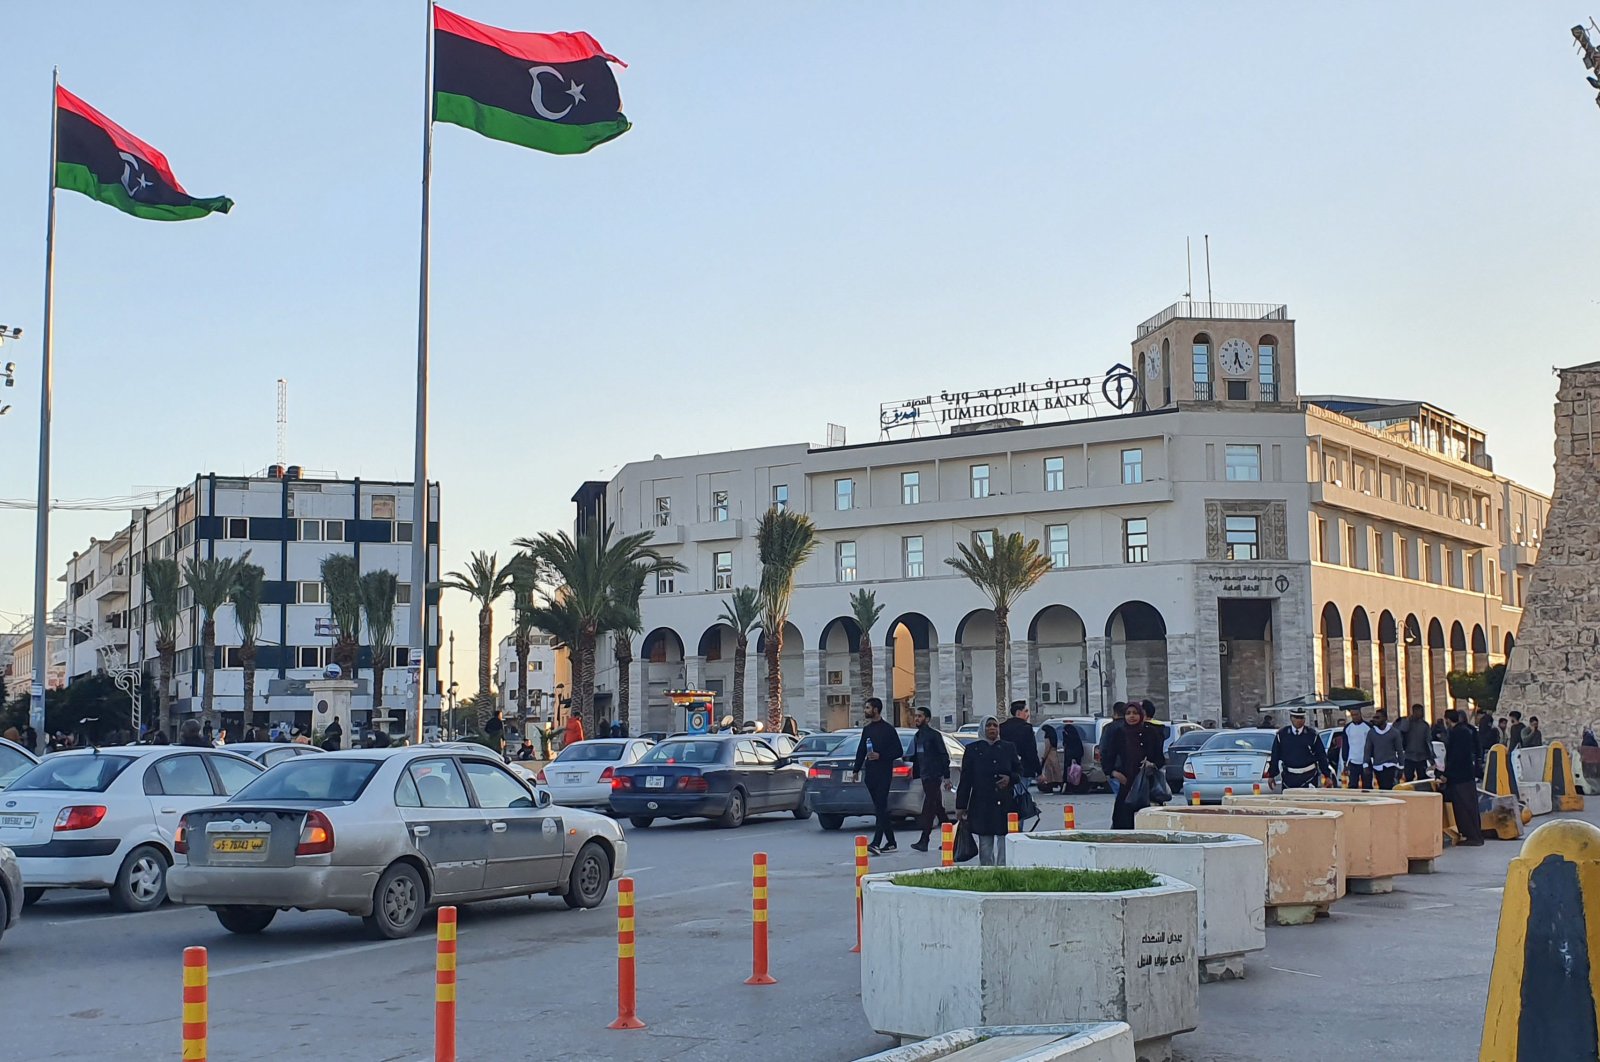  A view of Martyr's square in the Libyan capital Tripoli, Jan. 20, 2020. (AFP)